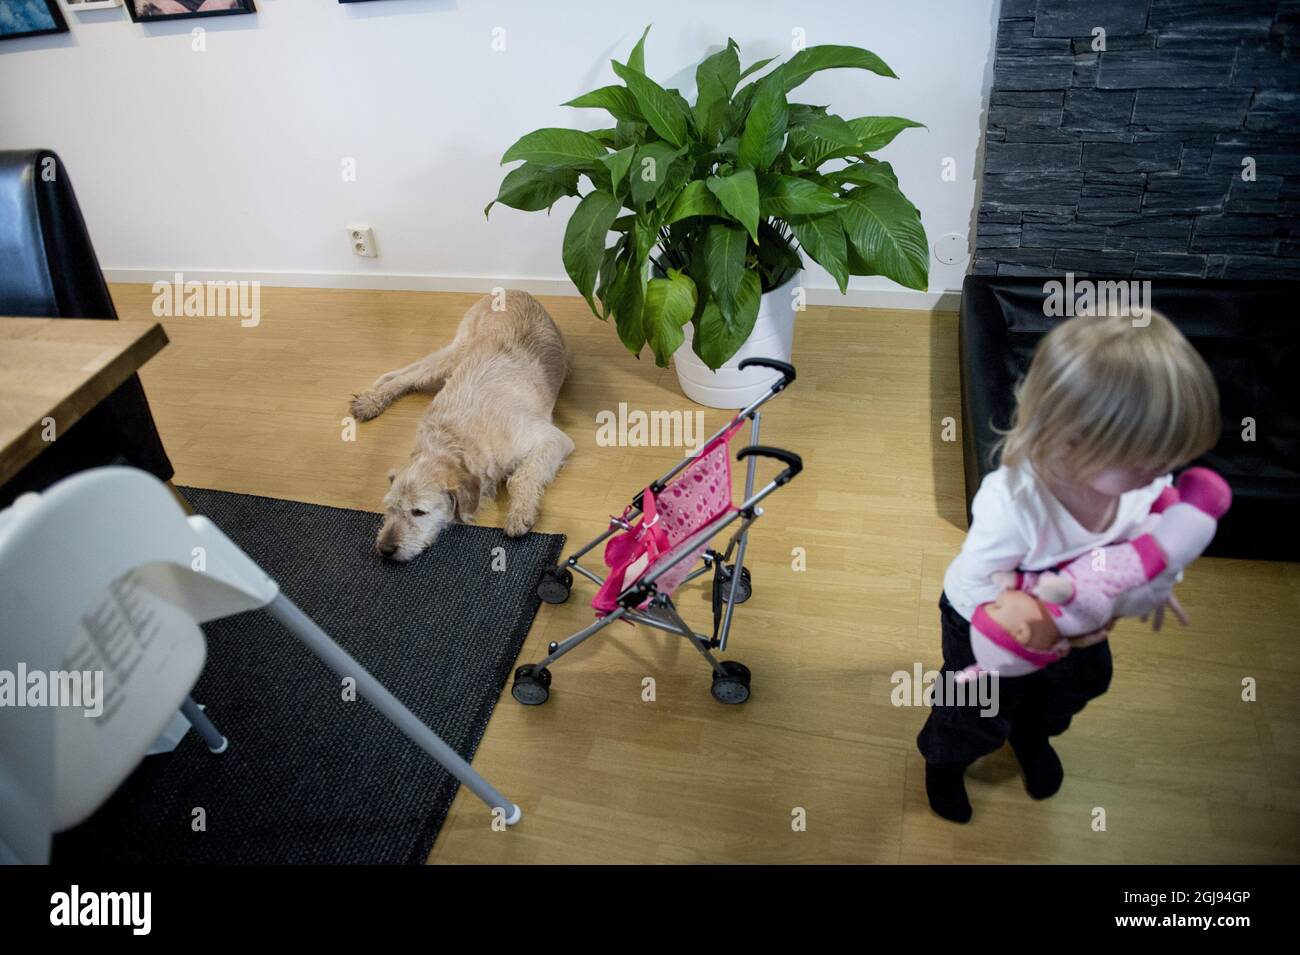 ORNSKOLDSVIK 2015-03-23 Former stray dog Arthur is seen relaxing with his new family, owner Mikael Lindnord, Helena Lindnord and daughter Philippa in his new home in Ornskoldsvik, North Sweden March 23, 2015. Arthur and Mikael Lindnord, member of the Swedish Multi Sport team, met during a lunch break in a small village in Ecuador in November 2014. Lindnord gave him a meatball and after that they became inseparable. Arthur followed the team everywhere for the rest of the multi-sport race and Lindnord decided to adopt Arthur and the dog will now live the rest of his life in Sweden. Foto: Nora L Stock Photo